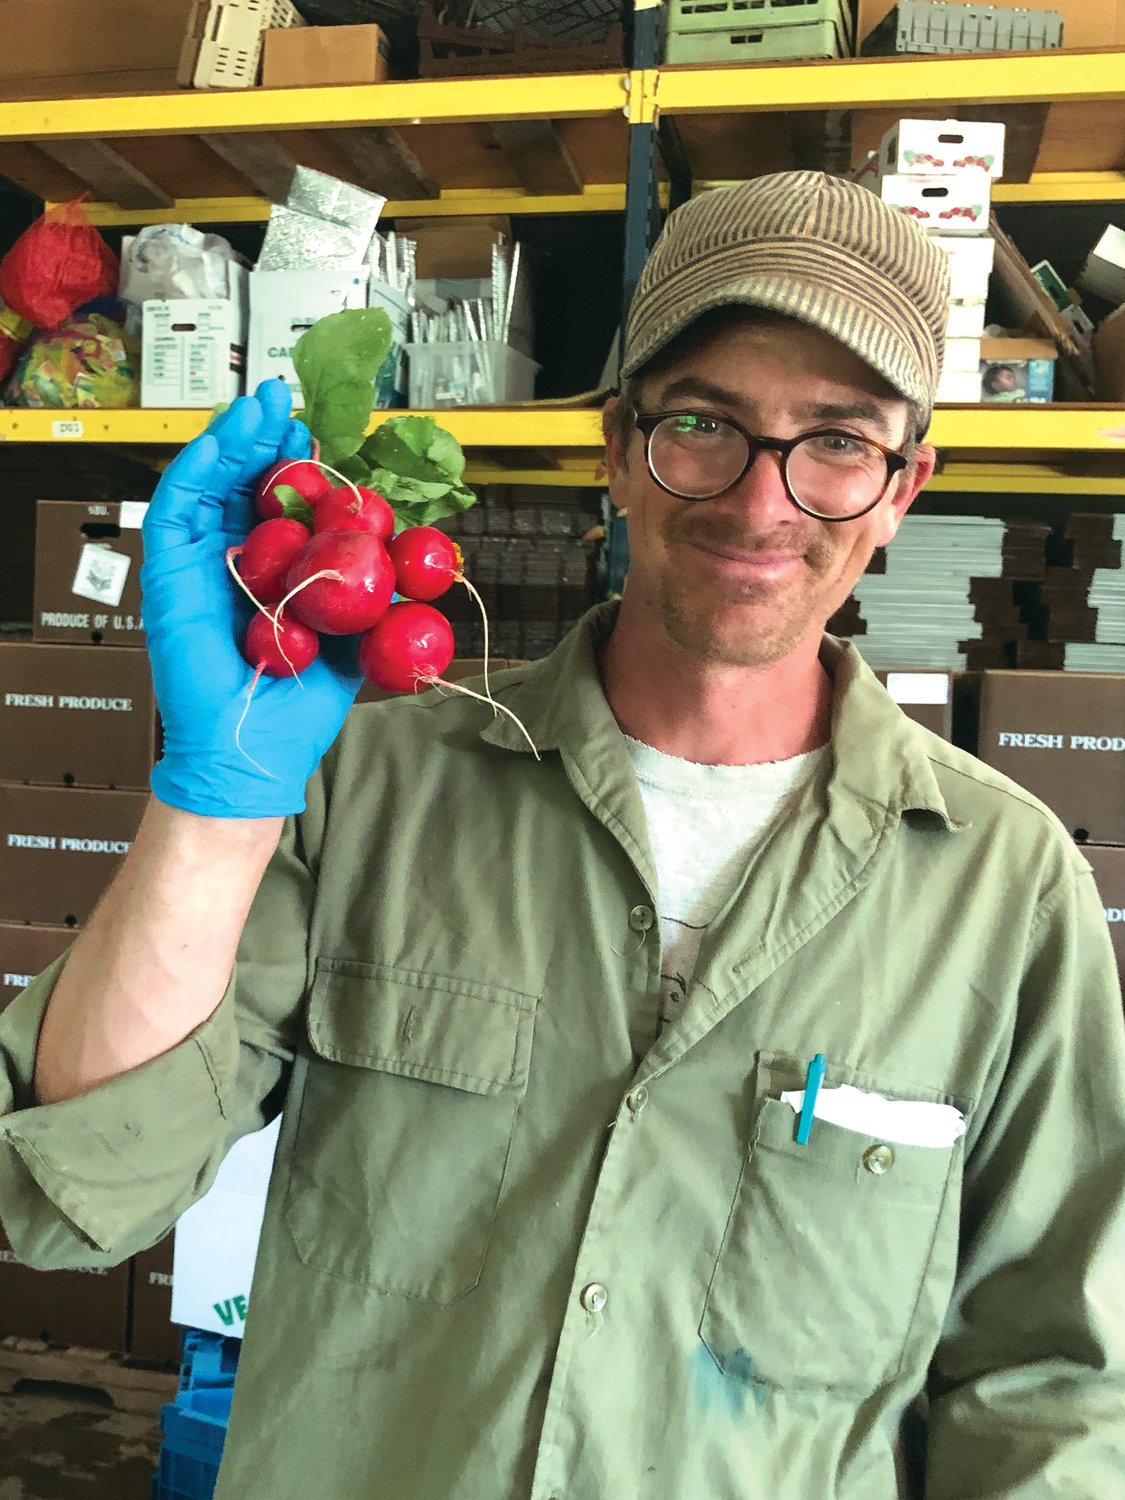 "Having a CSA is a way to commit to eating fresh, locally produced vegetables (and other offerings) and to have the opportunity to know and support the farmers growing your food," remarked Josh Bryceson of Turnip Rock, which offers a 22-week session with the option of setting holds on deliveries for vacations. "Think about what’s most important to you as an eater.  Is it farming practices? Is it social and food justice concerns? Is it convenience? Check out the delivery day, drop site locations, share size options, prices, and see if the farm’s offerings match your preferences for veggies. Most importantly, don’t hesitate to ask questions of the farm before signing up! Most farmers want potential CSA members to find a good match and will be honest if they believe their farm won’t be the best option for you." (Photo submitted)